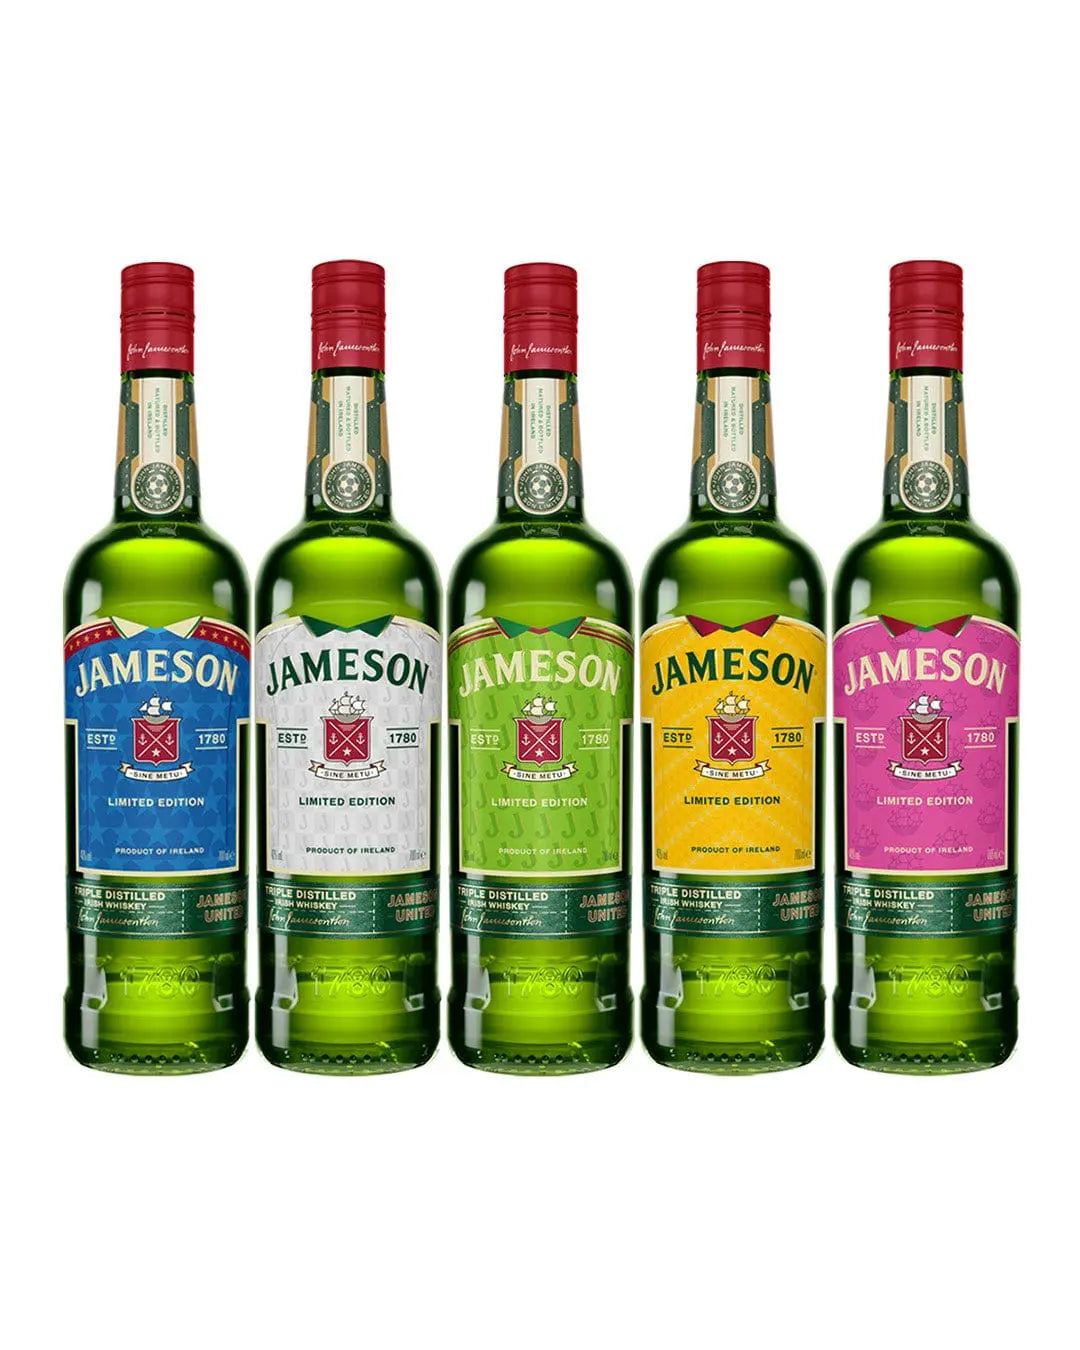 Jameson United Limited Edition Dream Team Whisky Case, 6 x 70 cl Whisky